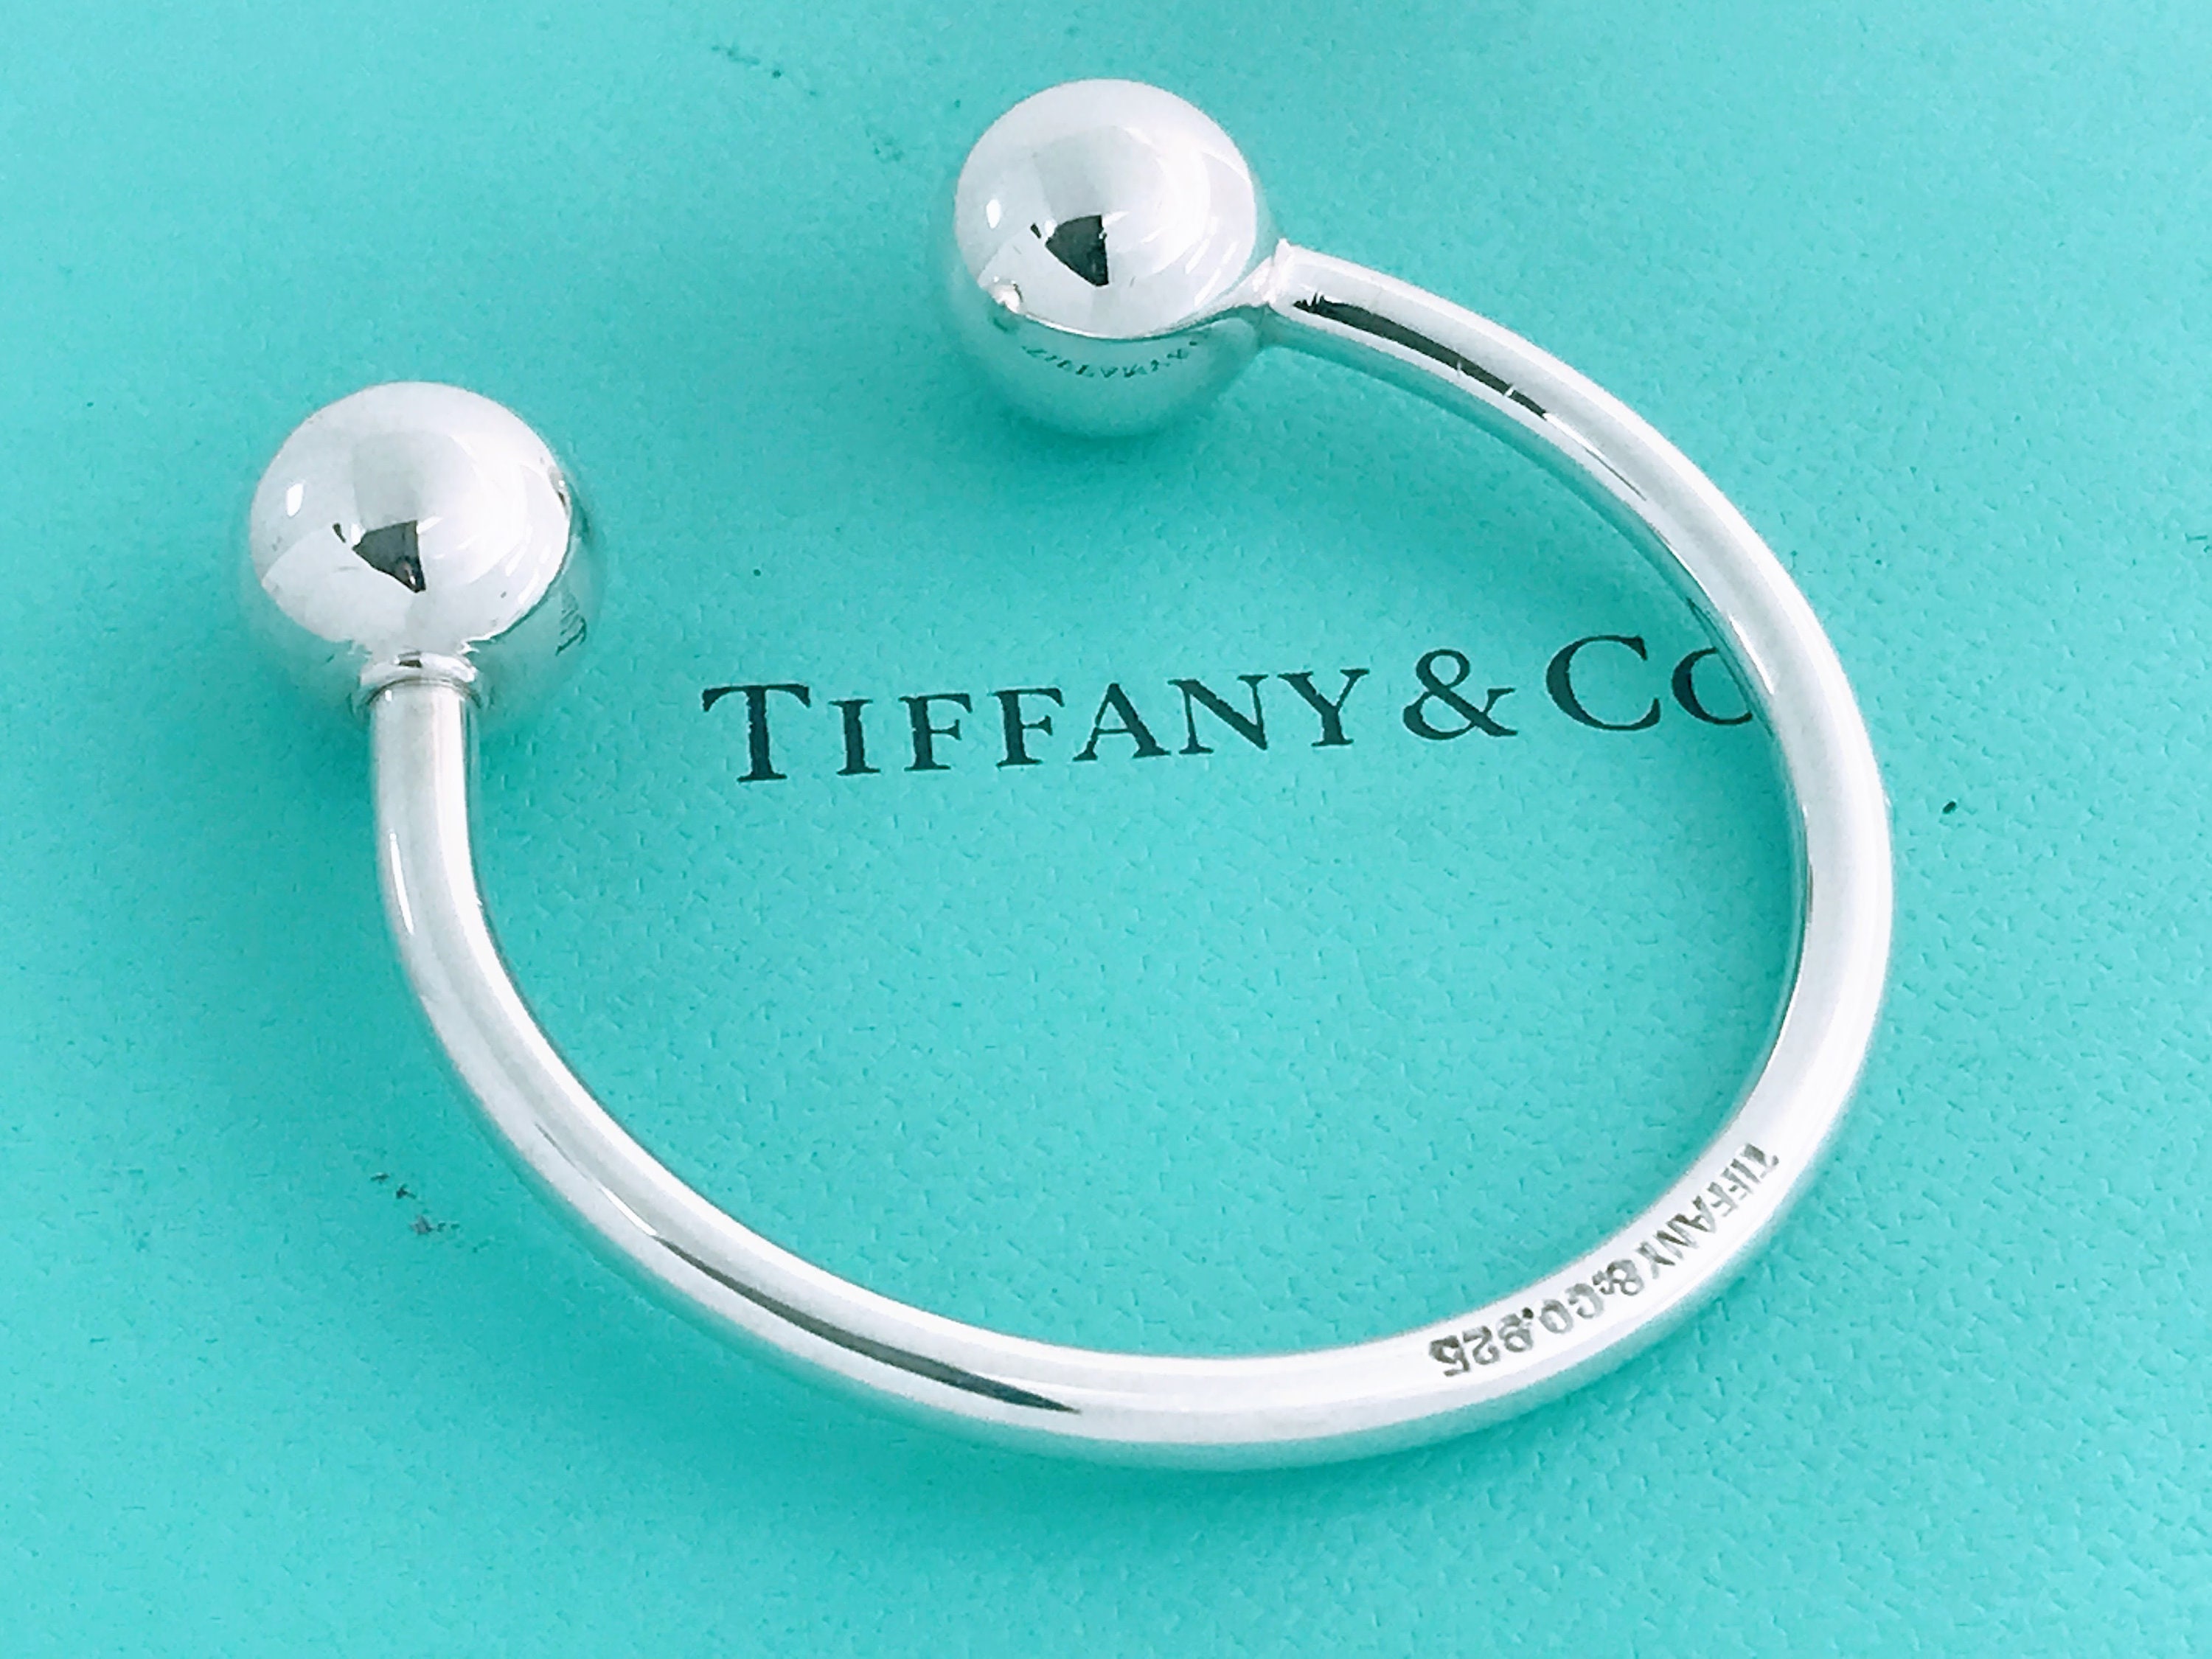 TIFFANY & Co. 925 Sterling Silver Large Key Ring Holder with Pouch